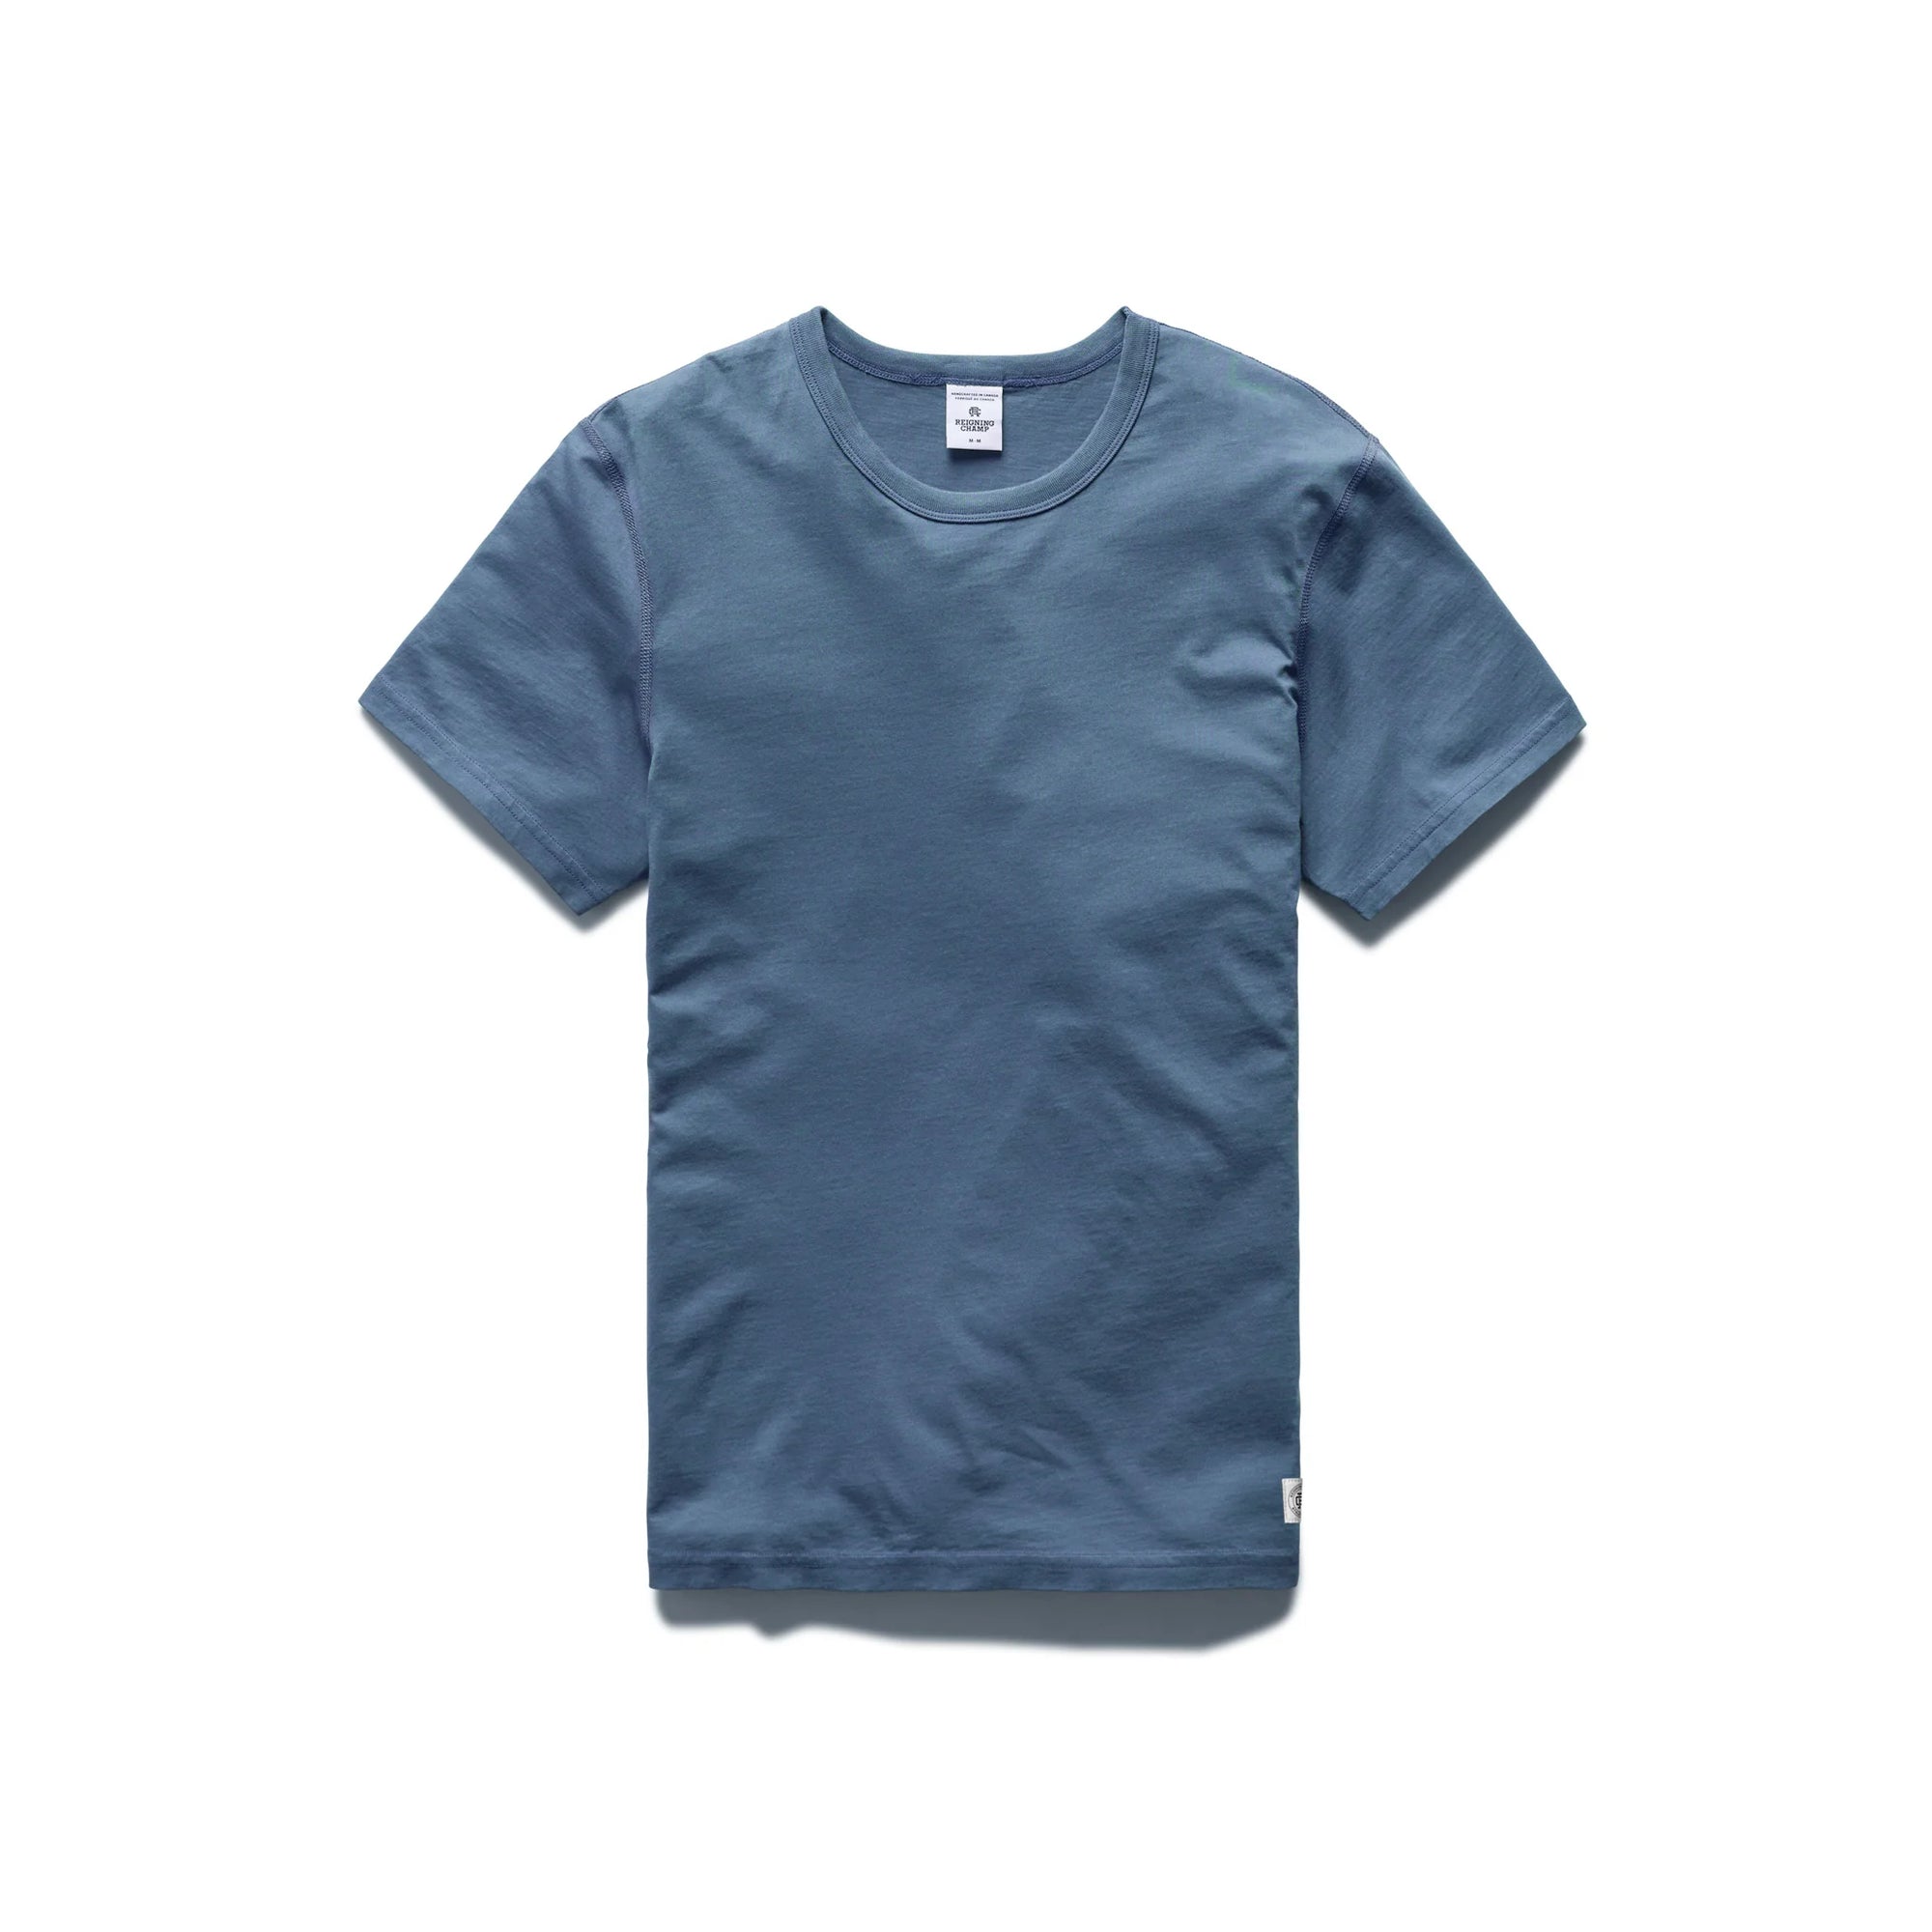 Reigning Champ Lightweight Jersey T-Shirt in Washed Blue